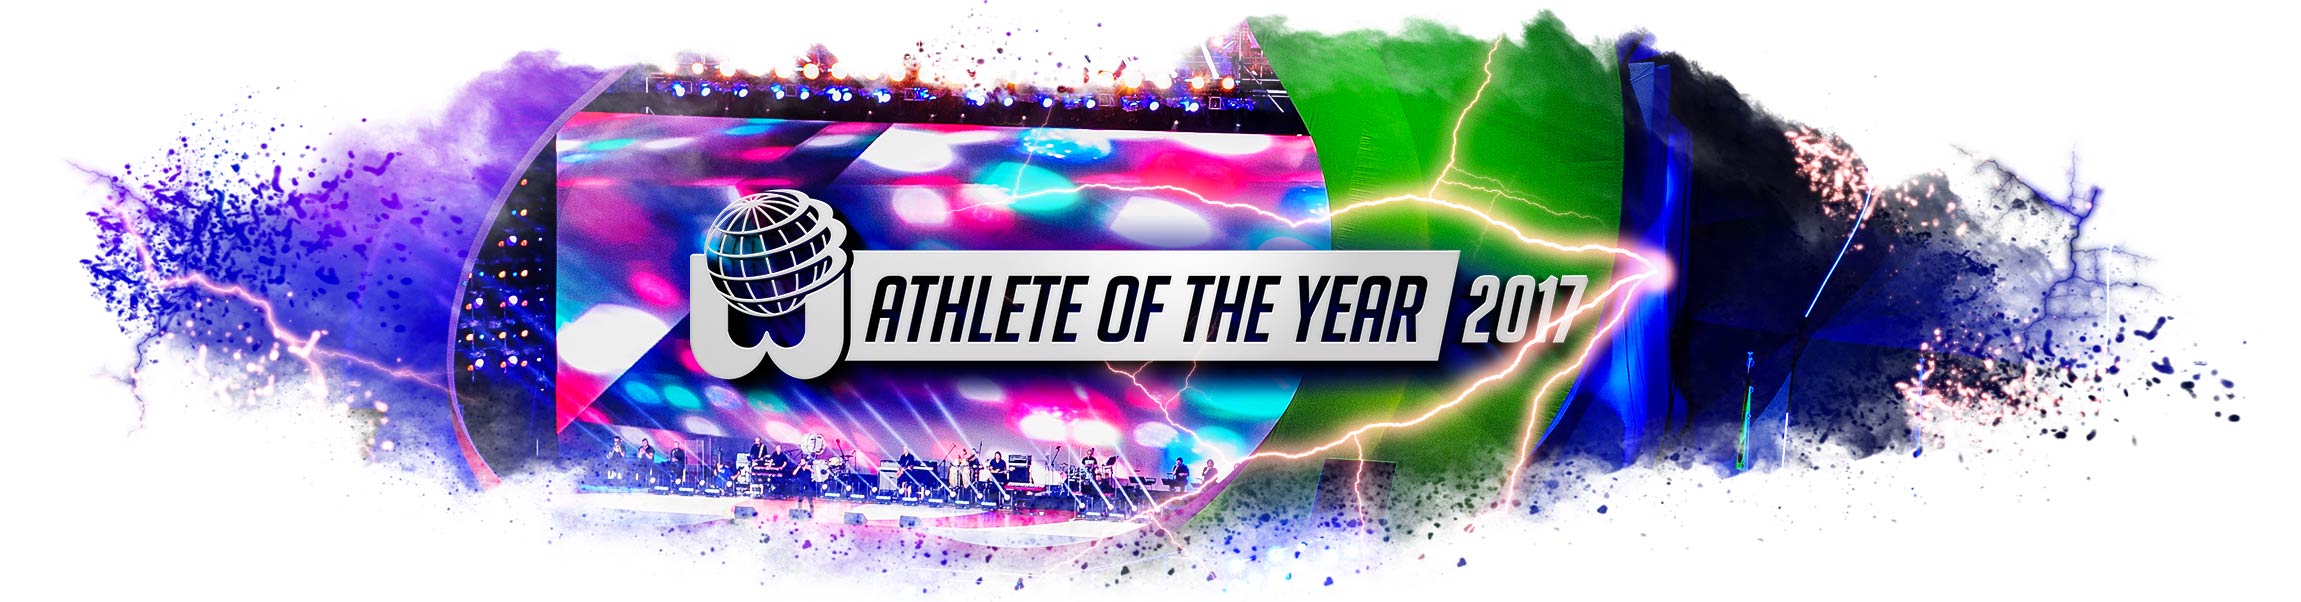 Athlete of the year 2017 vote banner